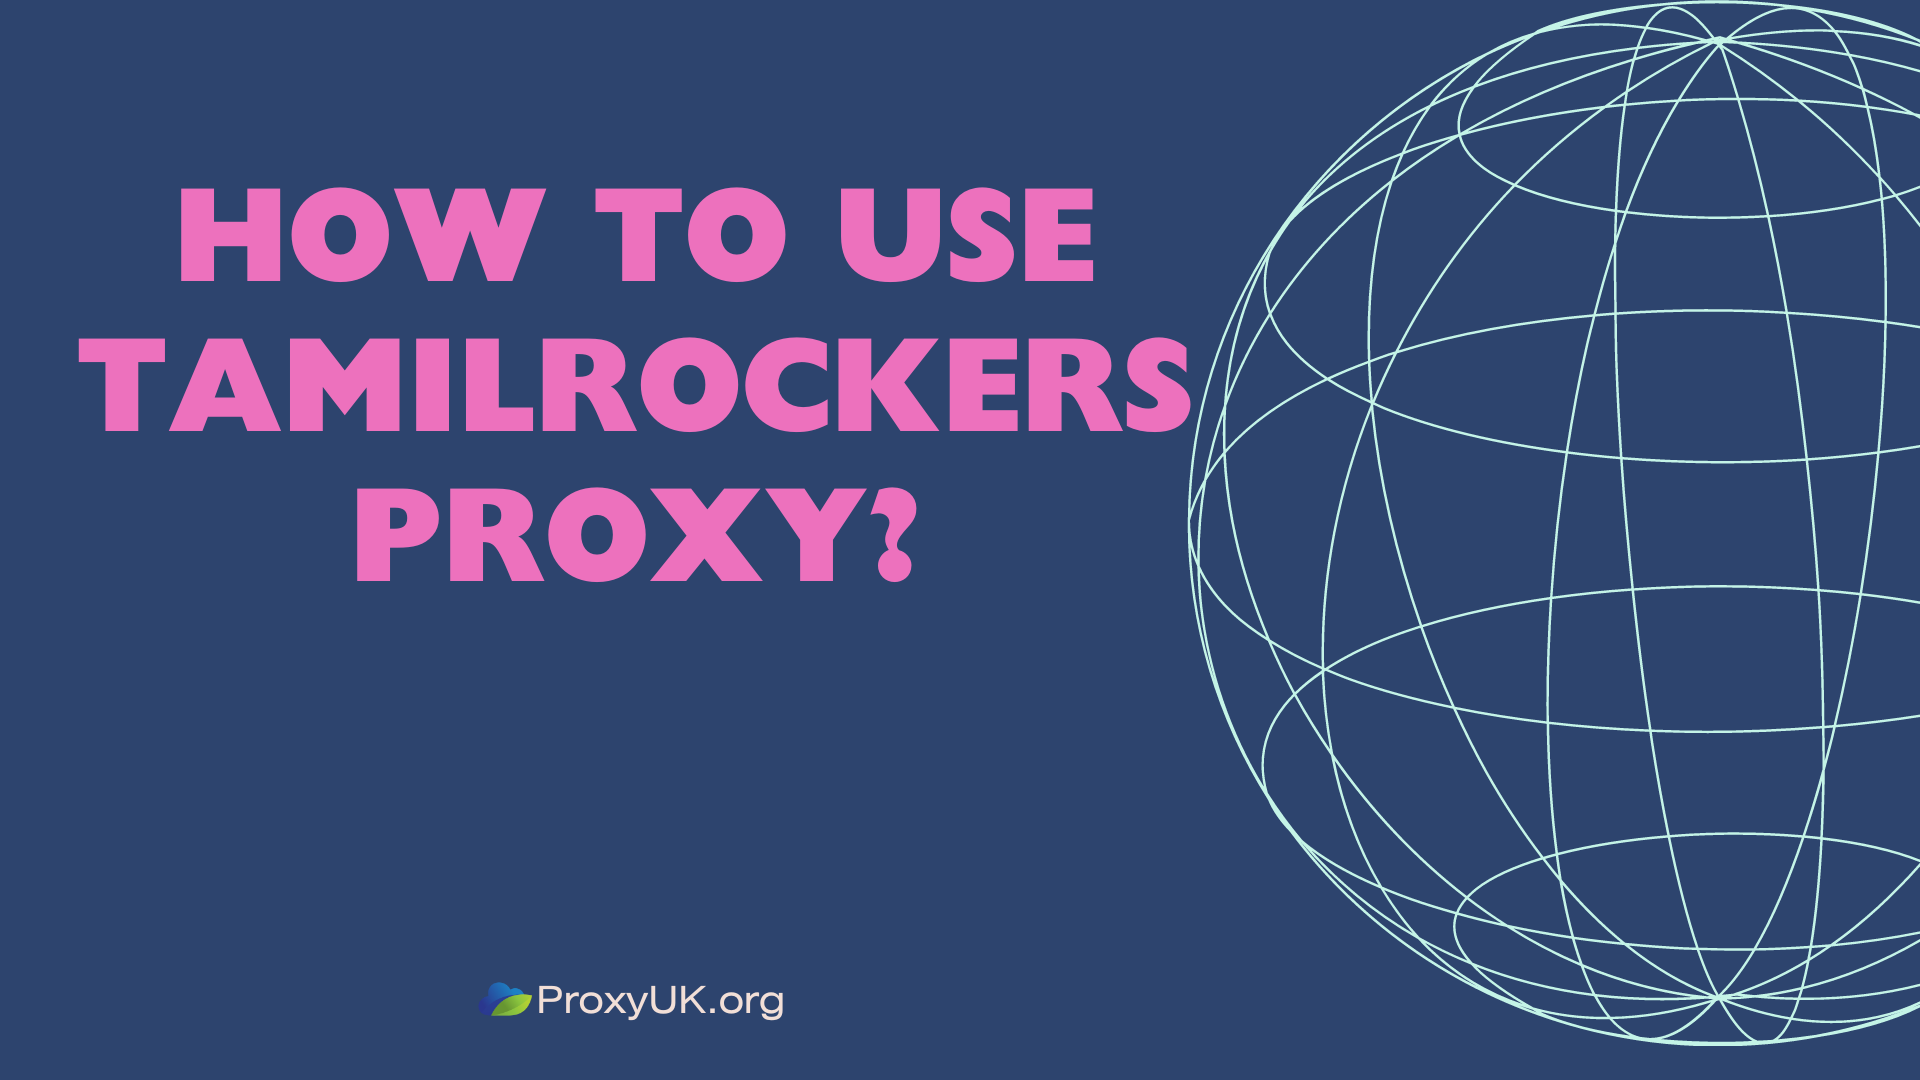 How to use Tamilrockers proxy?